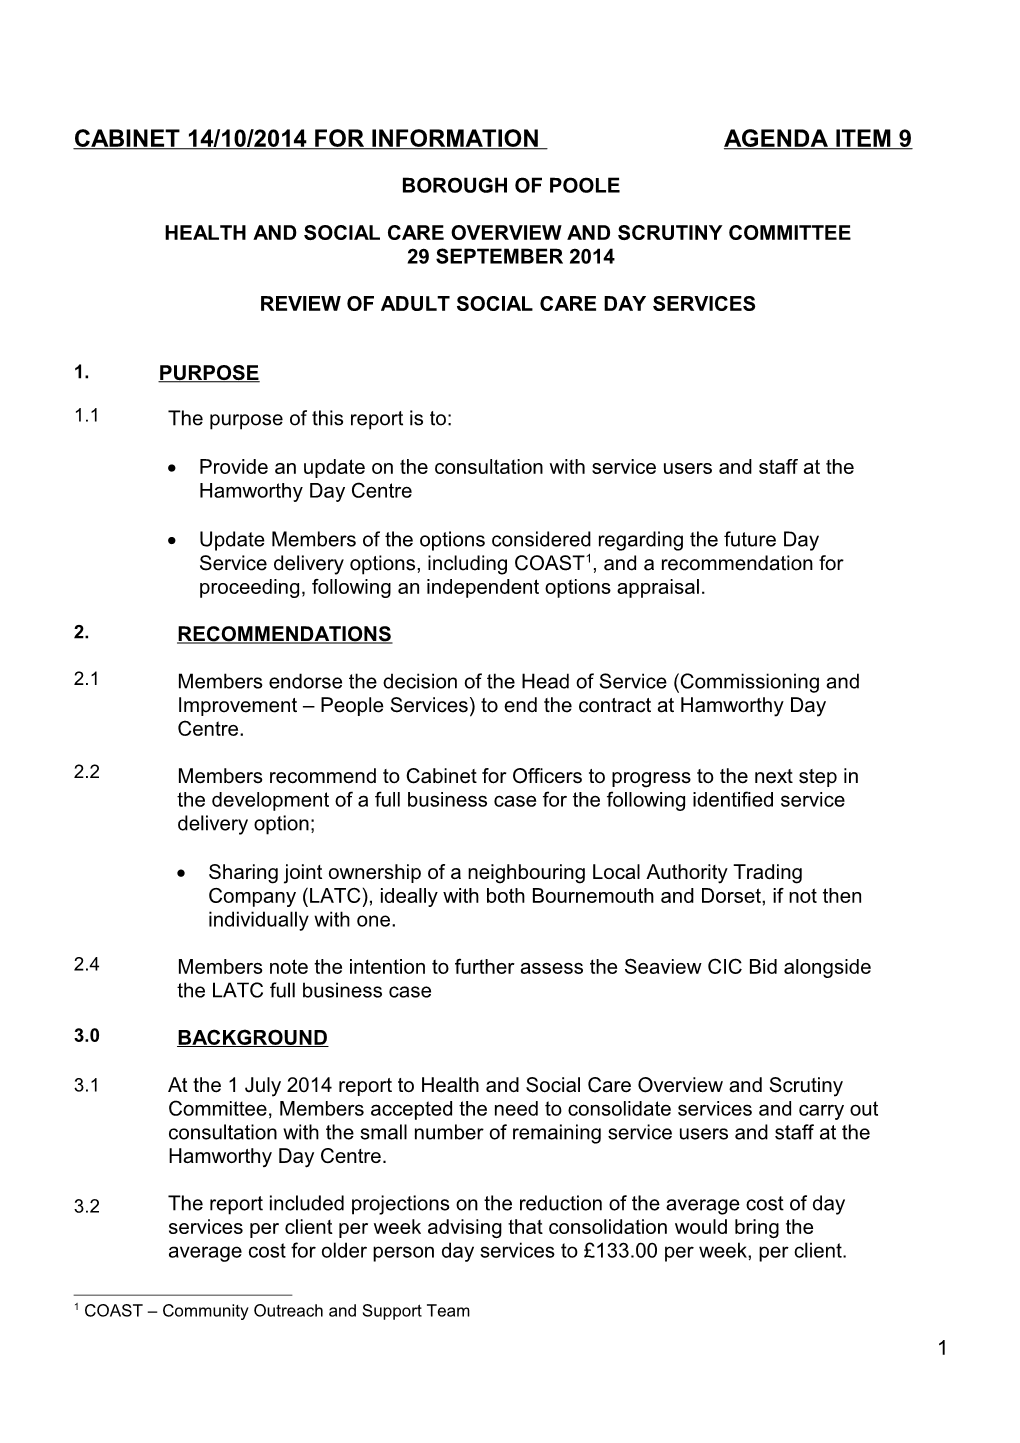 Health and Social Care Overview and Scrutiny Committee